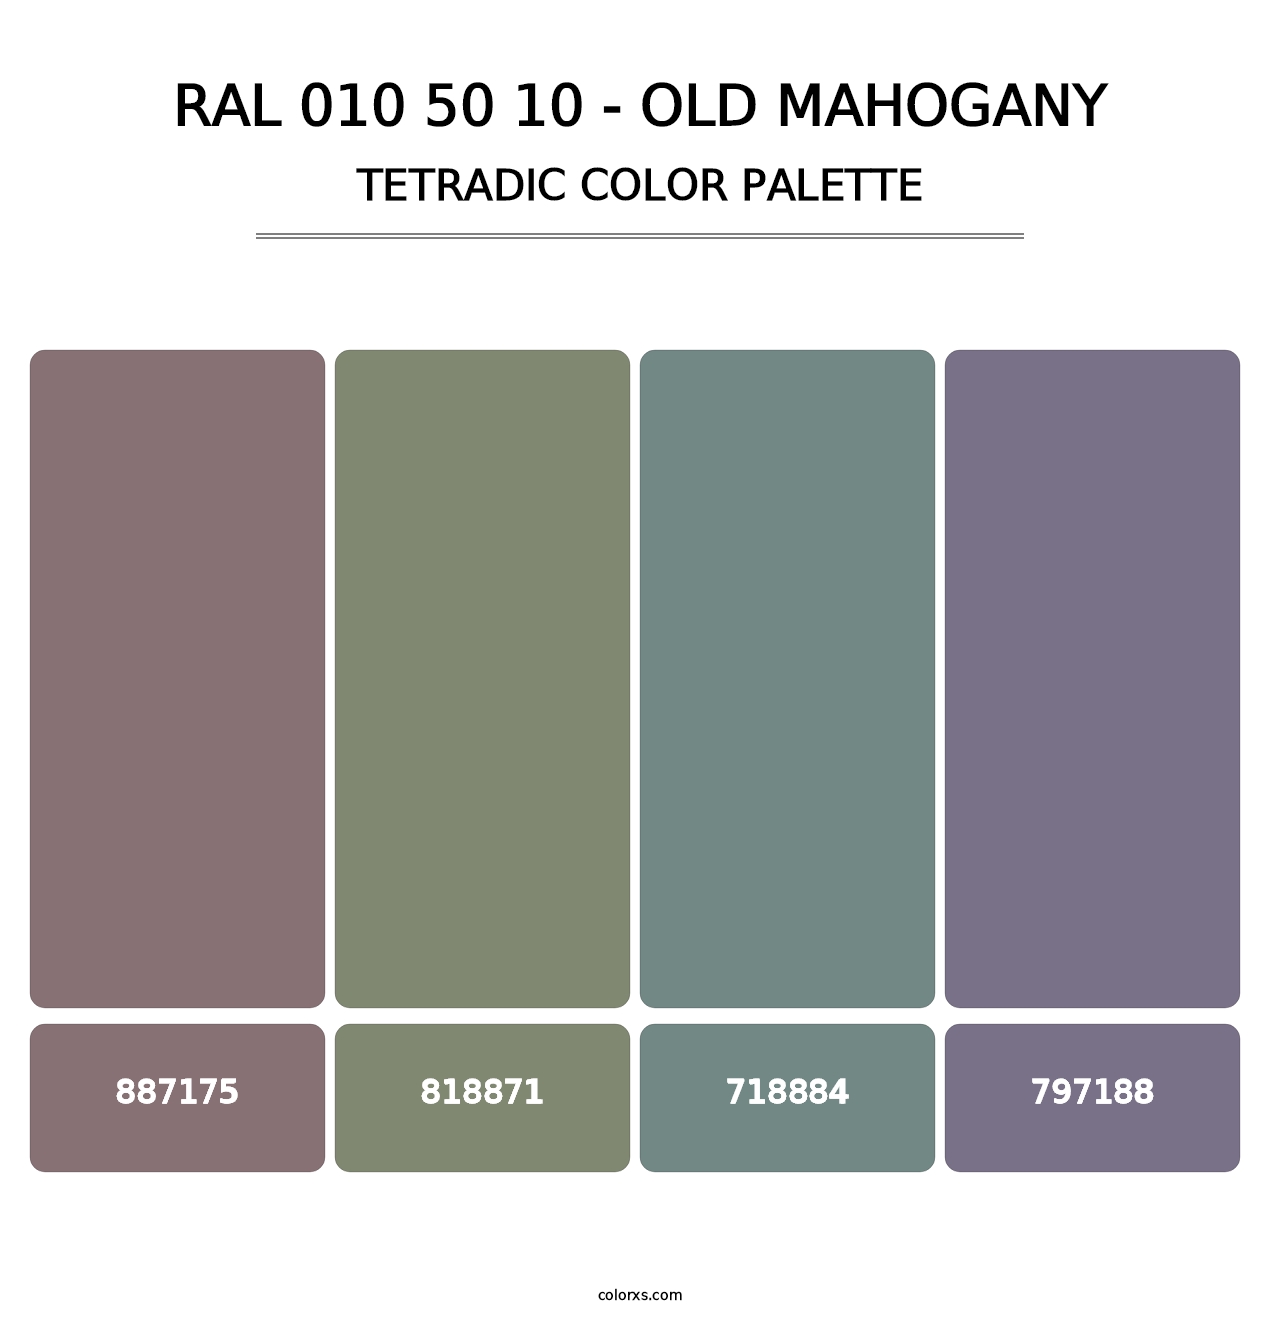 RAL 010 50 10 - Old Mahogany - Tetradic Color Palette